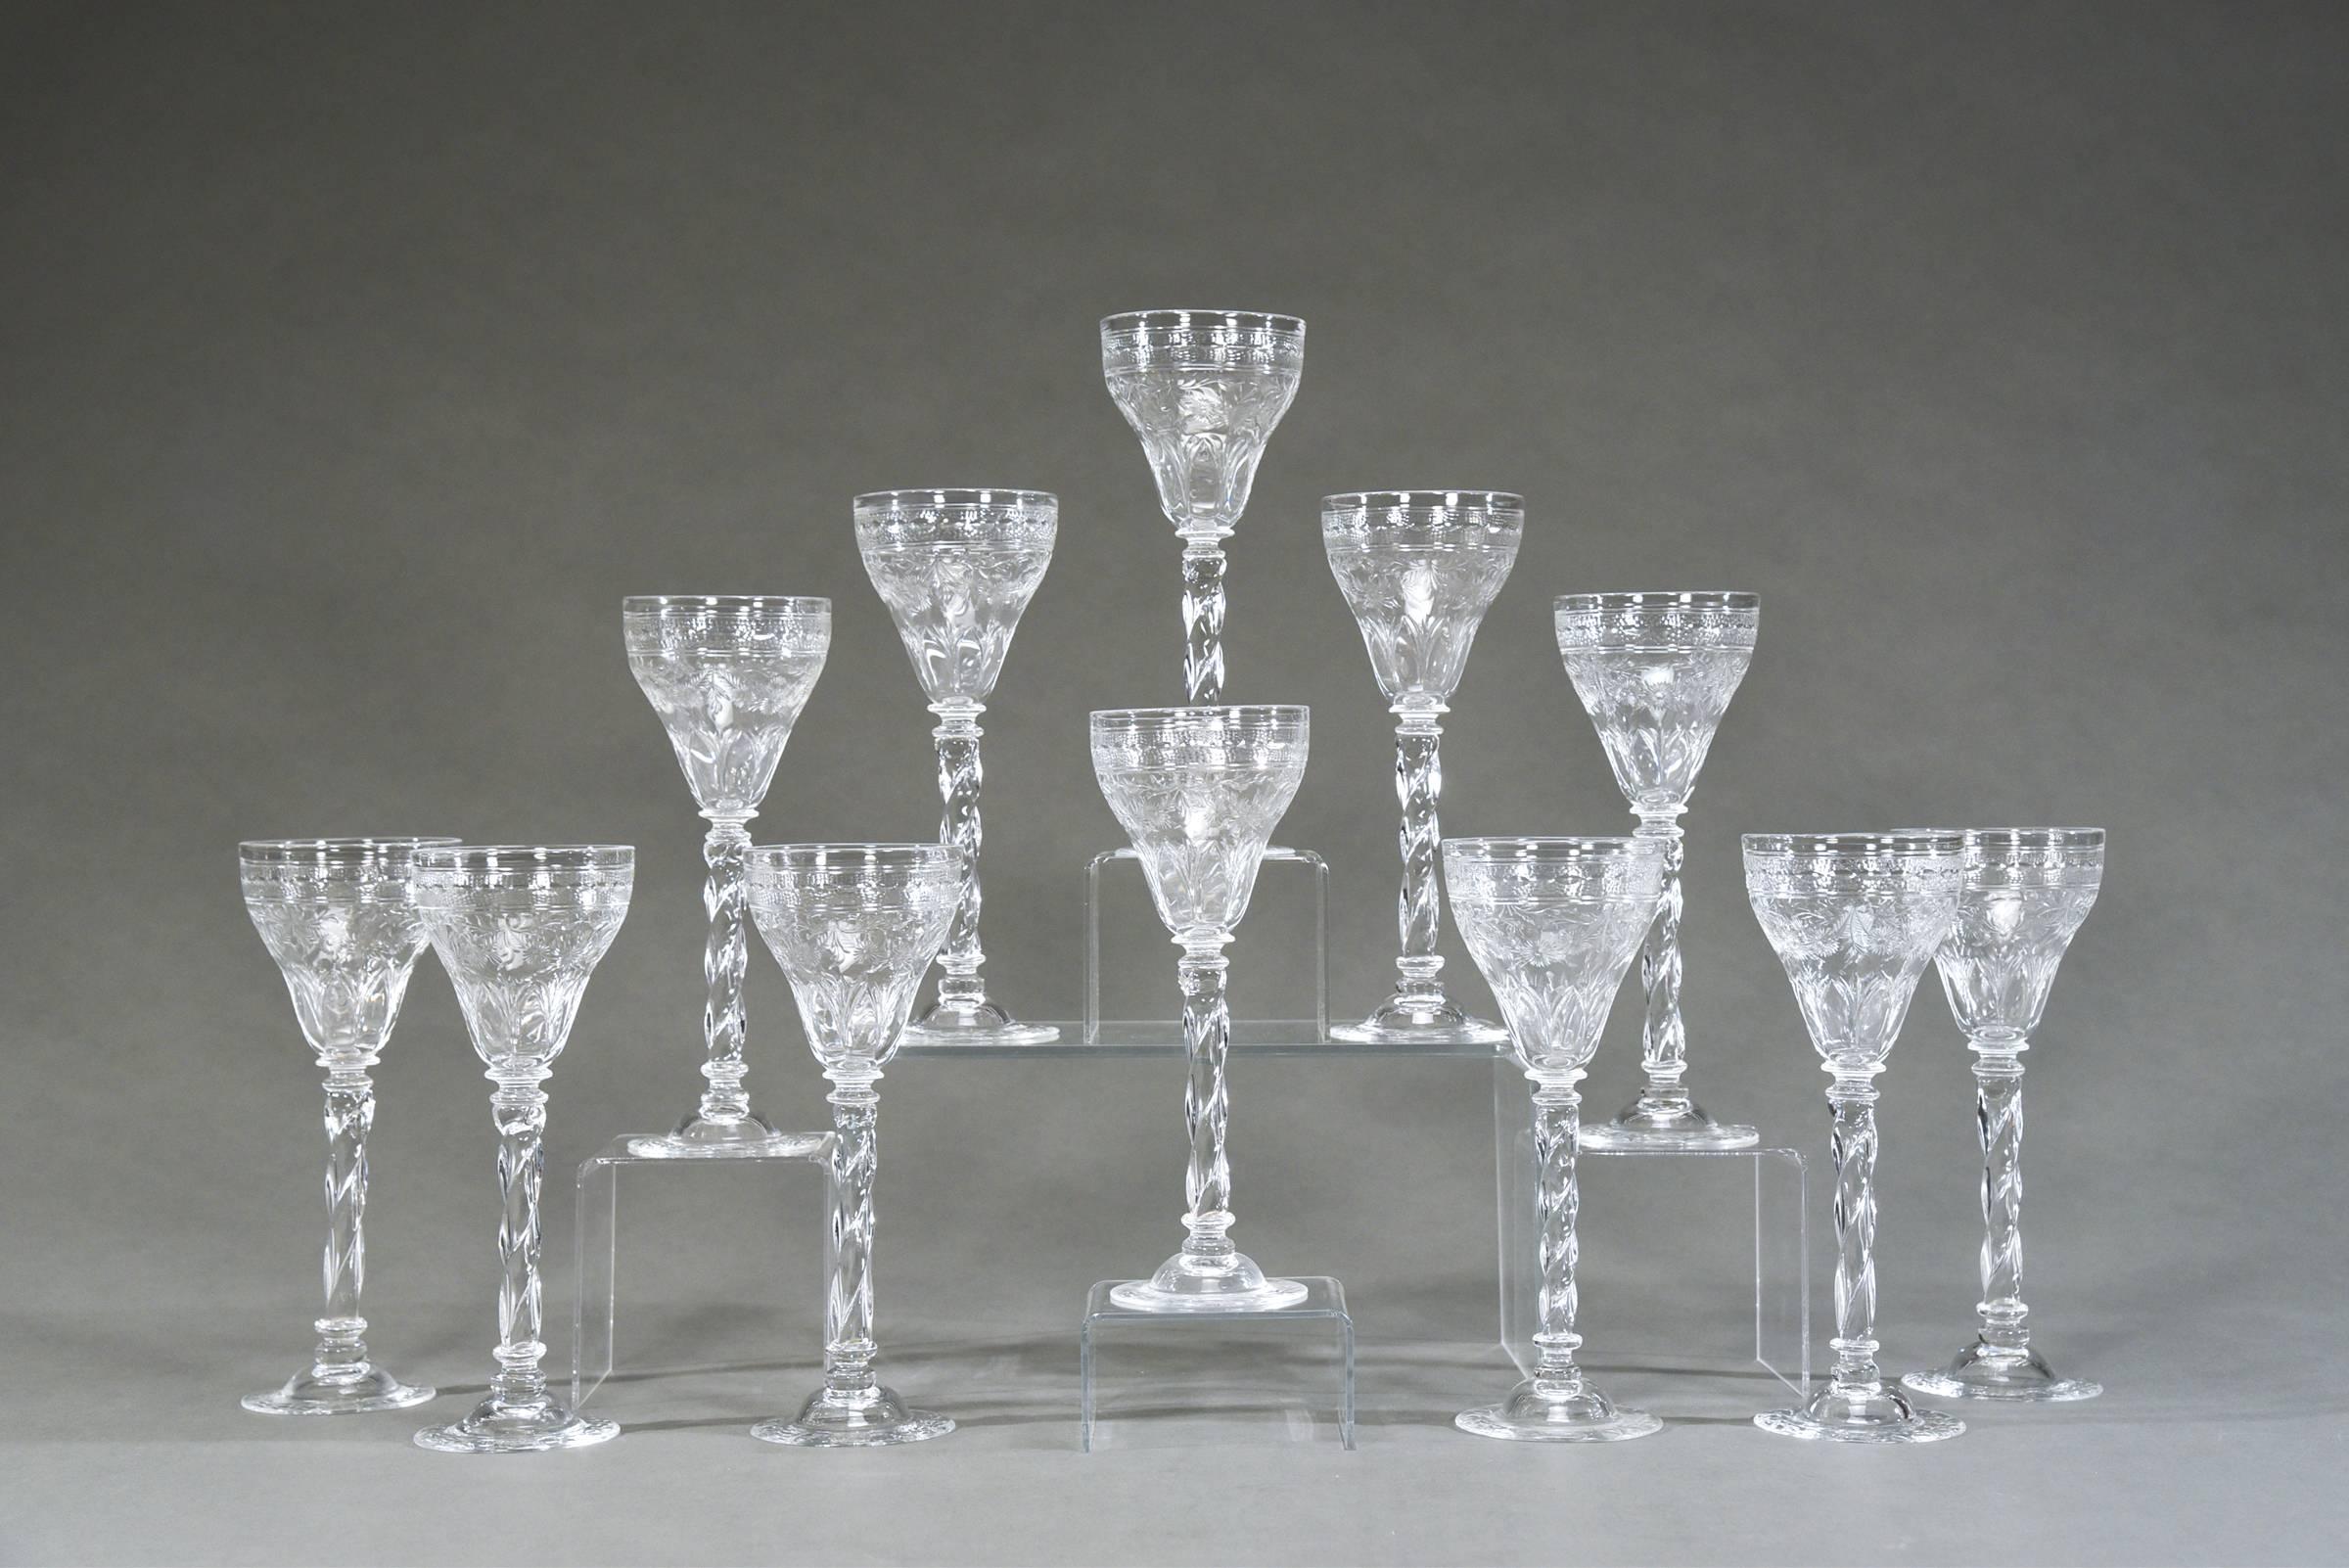 This set of 12 handblown crystal goblets are made by Webb, England and are clearly, a cut above the rest when it comes to design and elegance. They feature an elongated spiral twist stem and a substantial sized goblet, perfect for your favourite